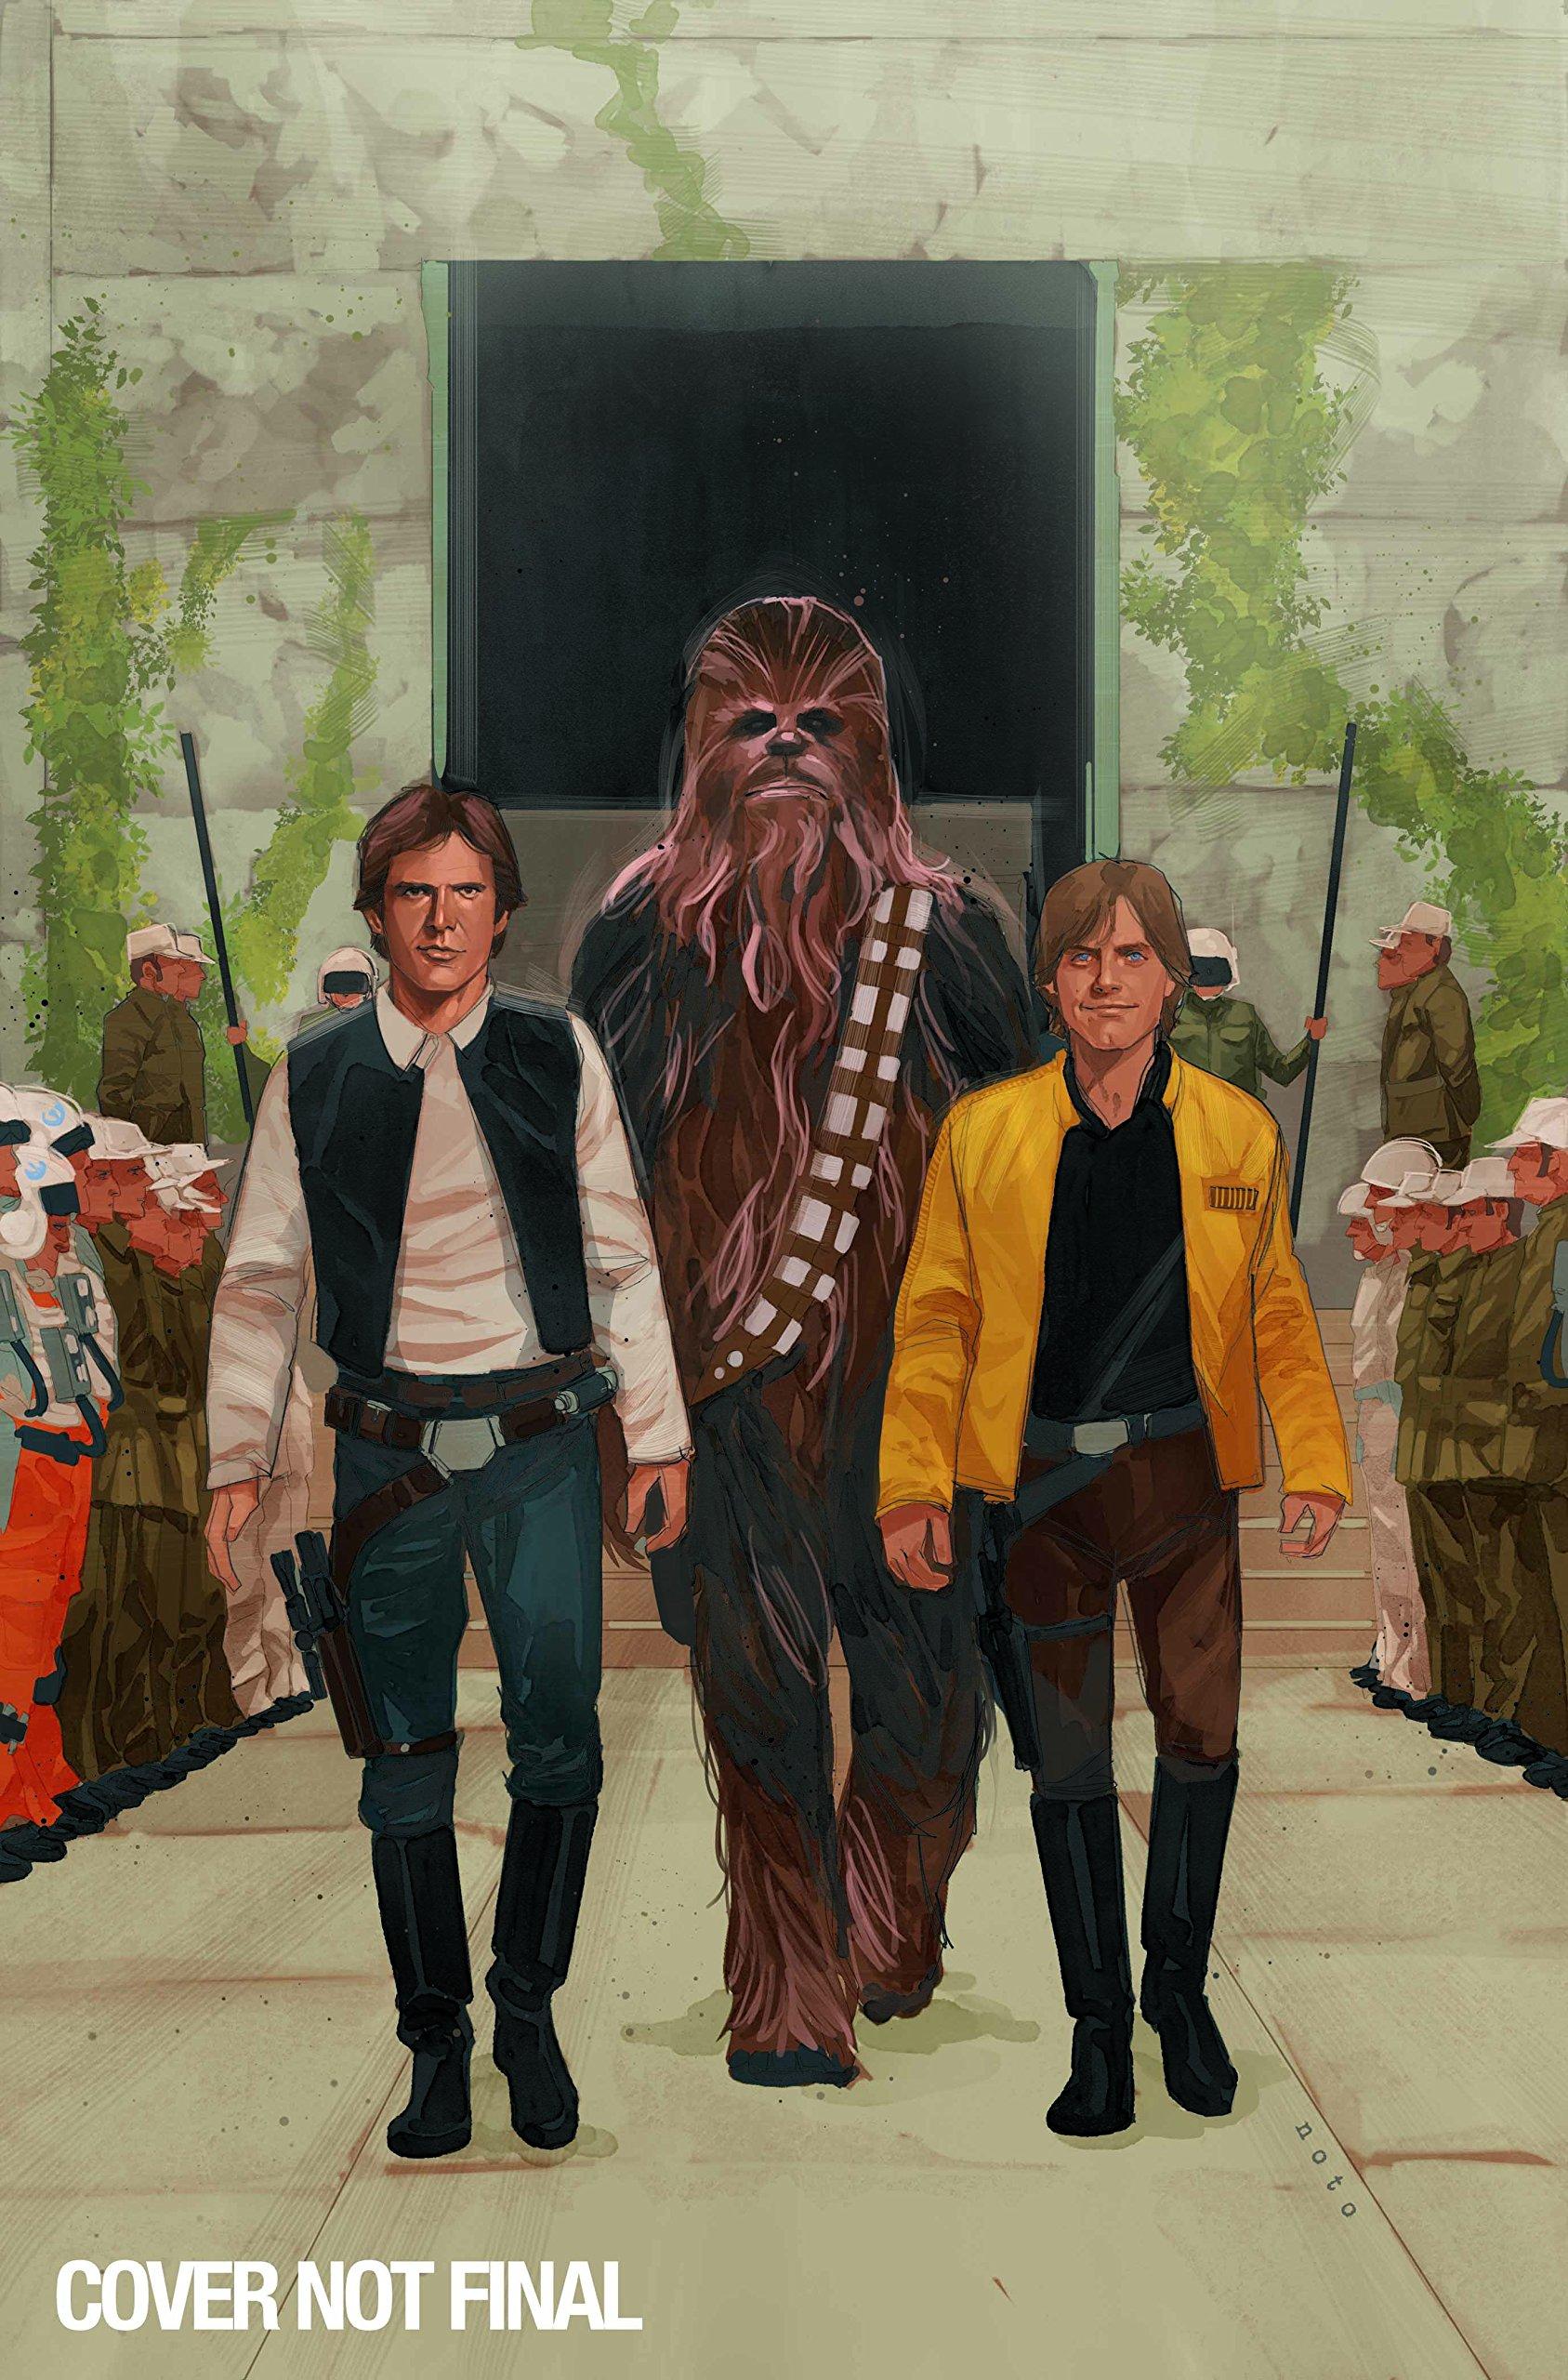 Star Wars: A New Hope - The 40th Anniversary Vol. 1 #1